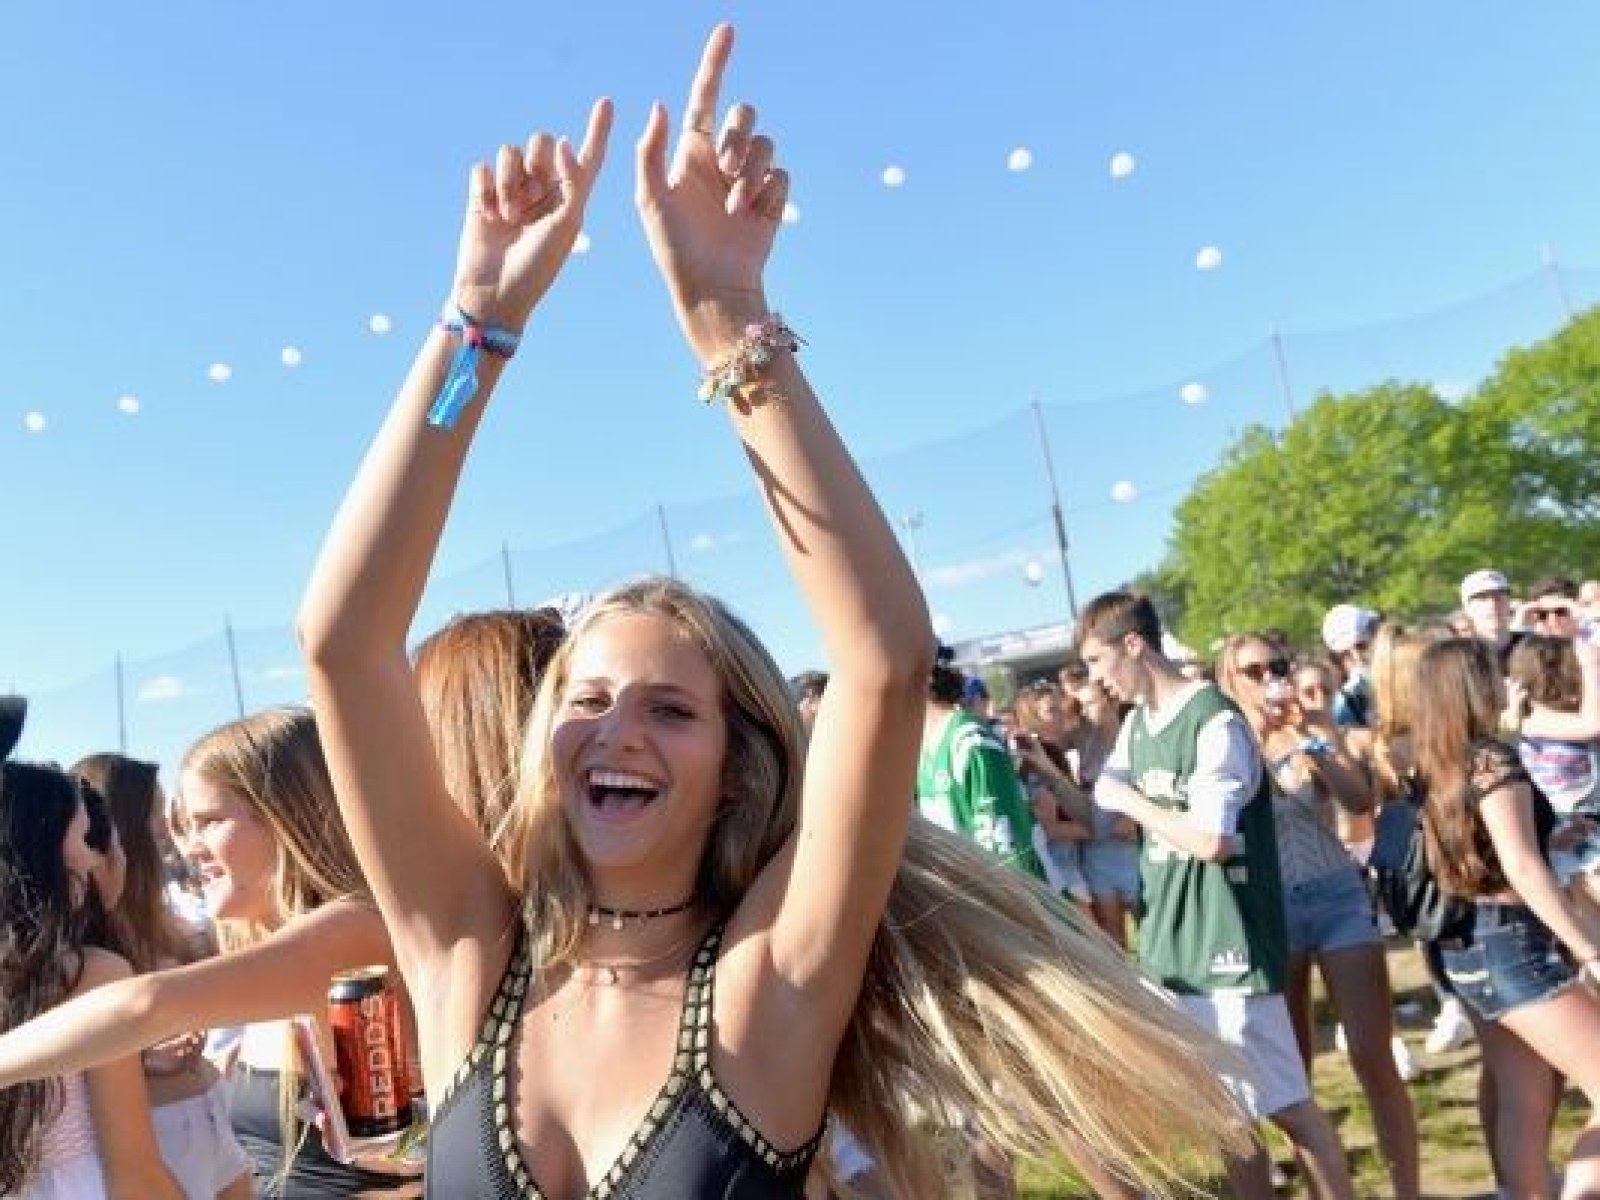 Naked Women (Nearly): Fashion at Governors Ball Frees the Nipple